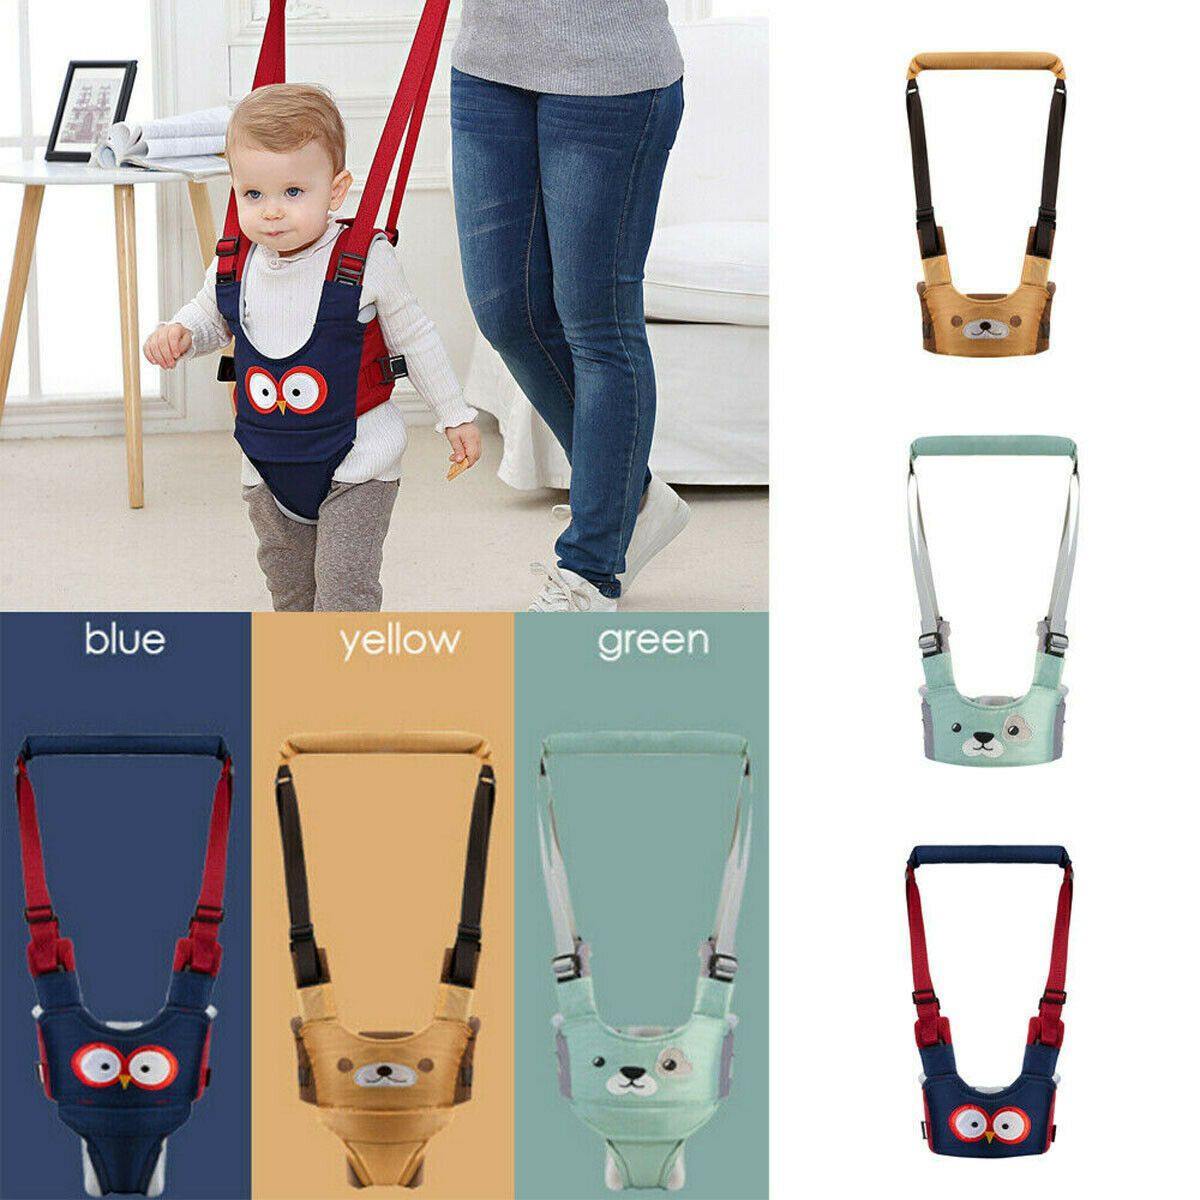 Baby Toddler Walking Wings Belt Safety Harness Strap Walk Assistant Infant Carry 